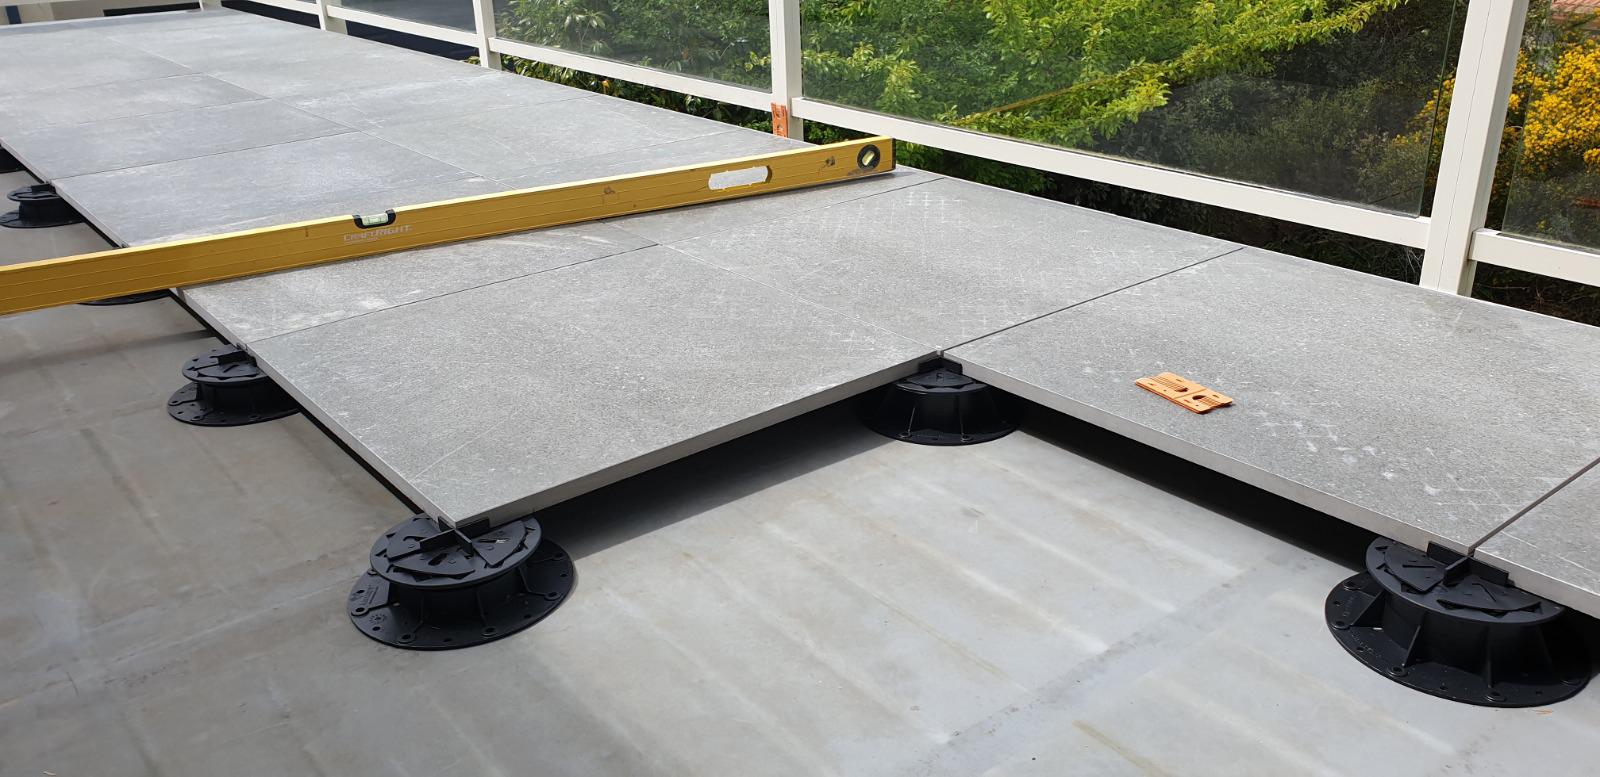 Benefits of Using Adjustable Paving Support Systems